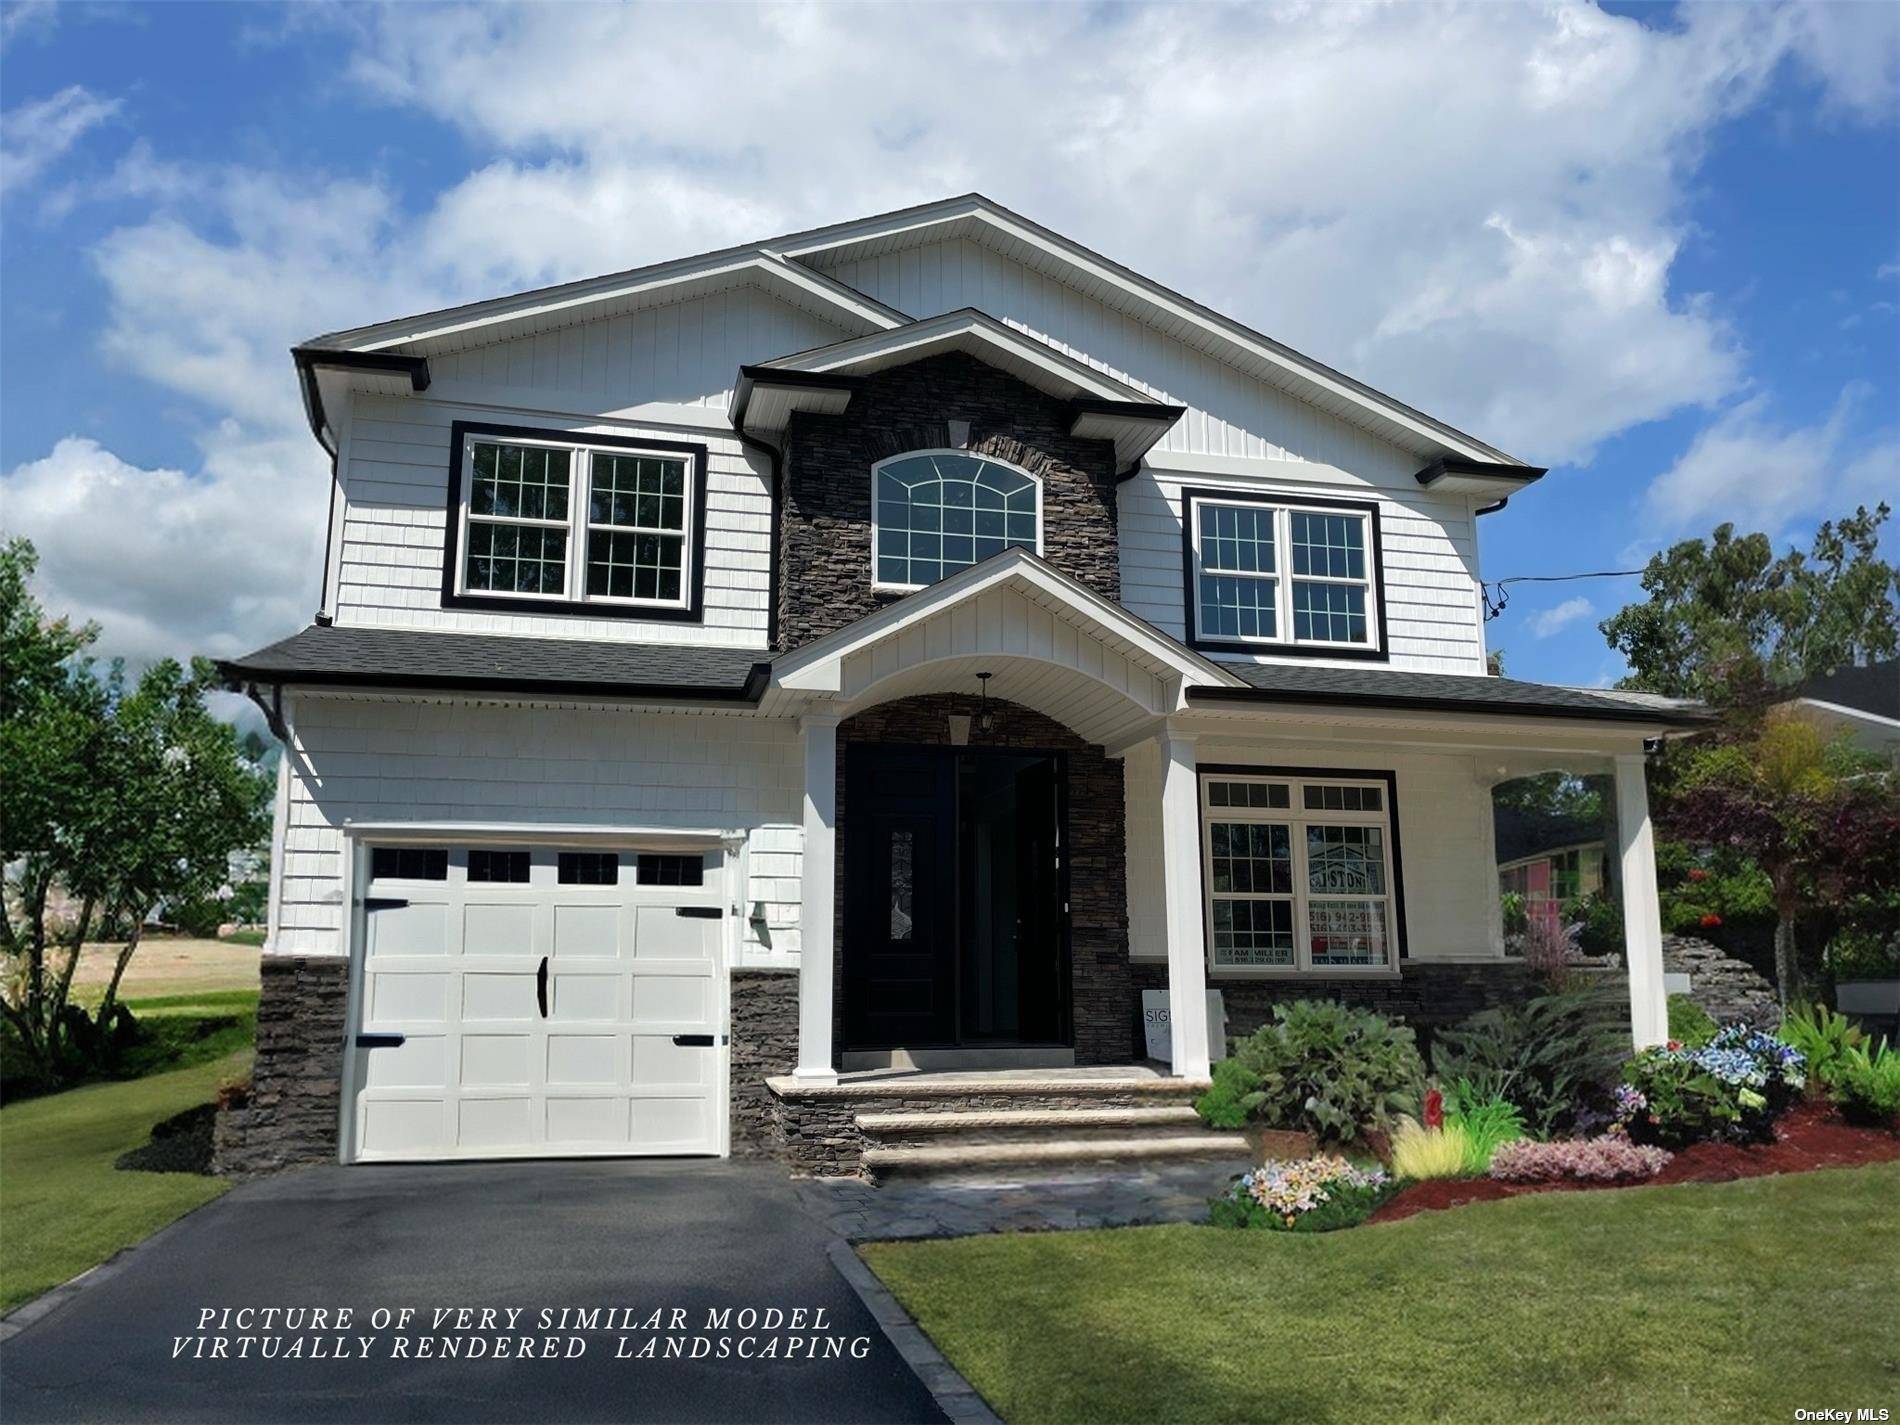 Tucked away in a hidden corner of East Meadow, you'll find this gem of a sub division featuring four brand new homes built by a premier builder with generations of ...